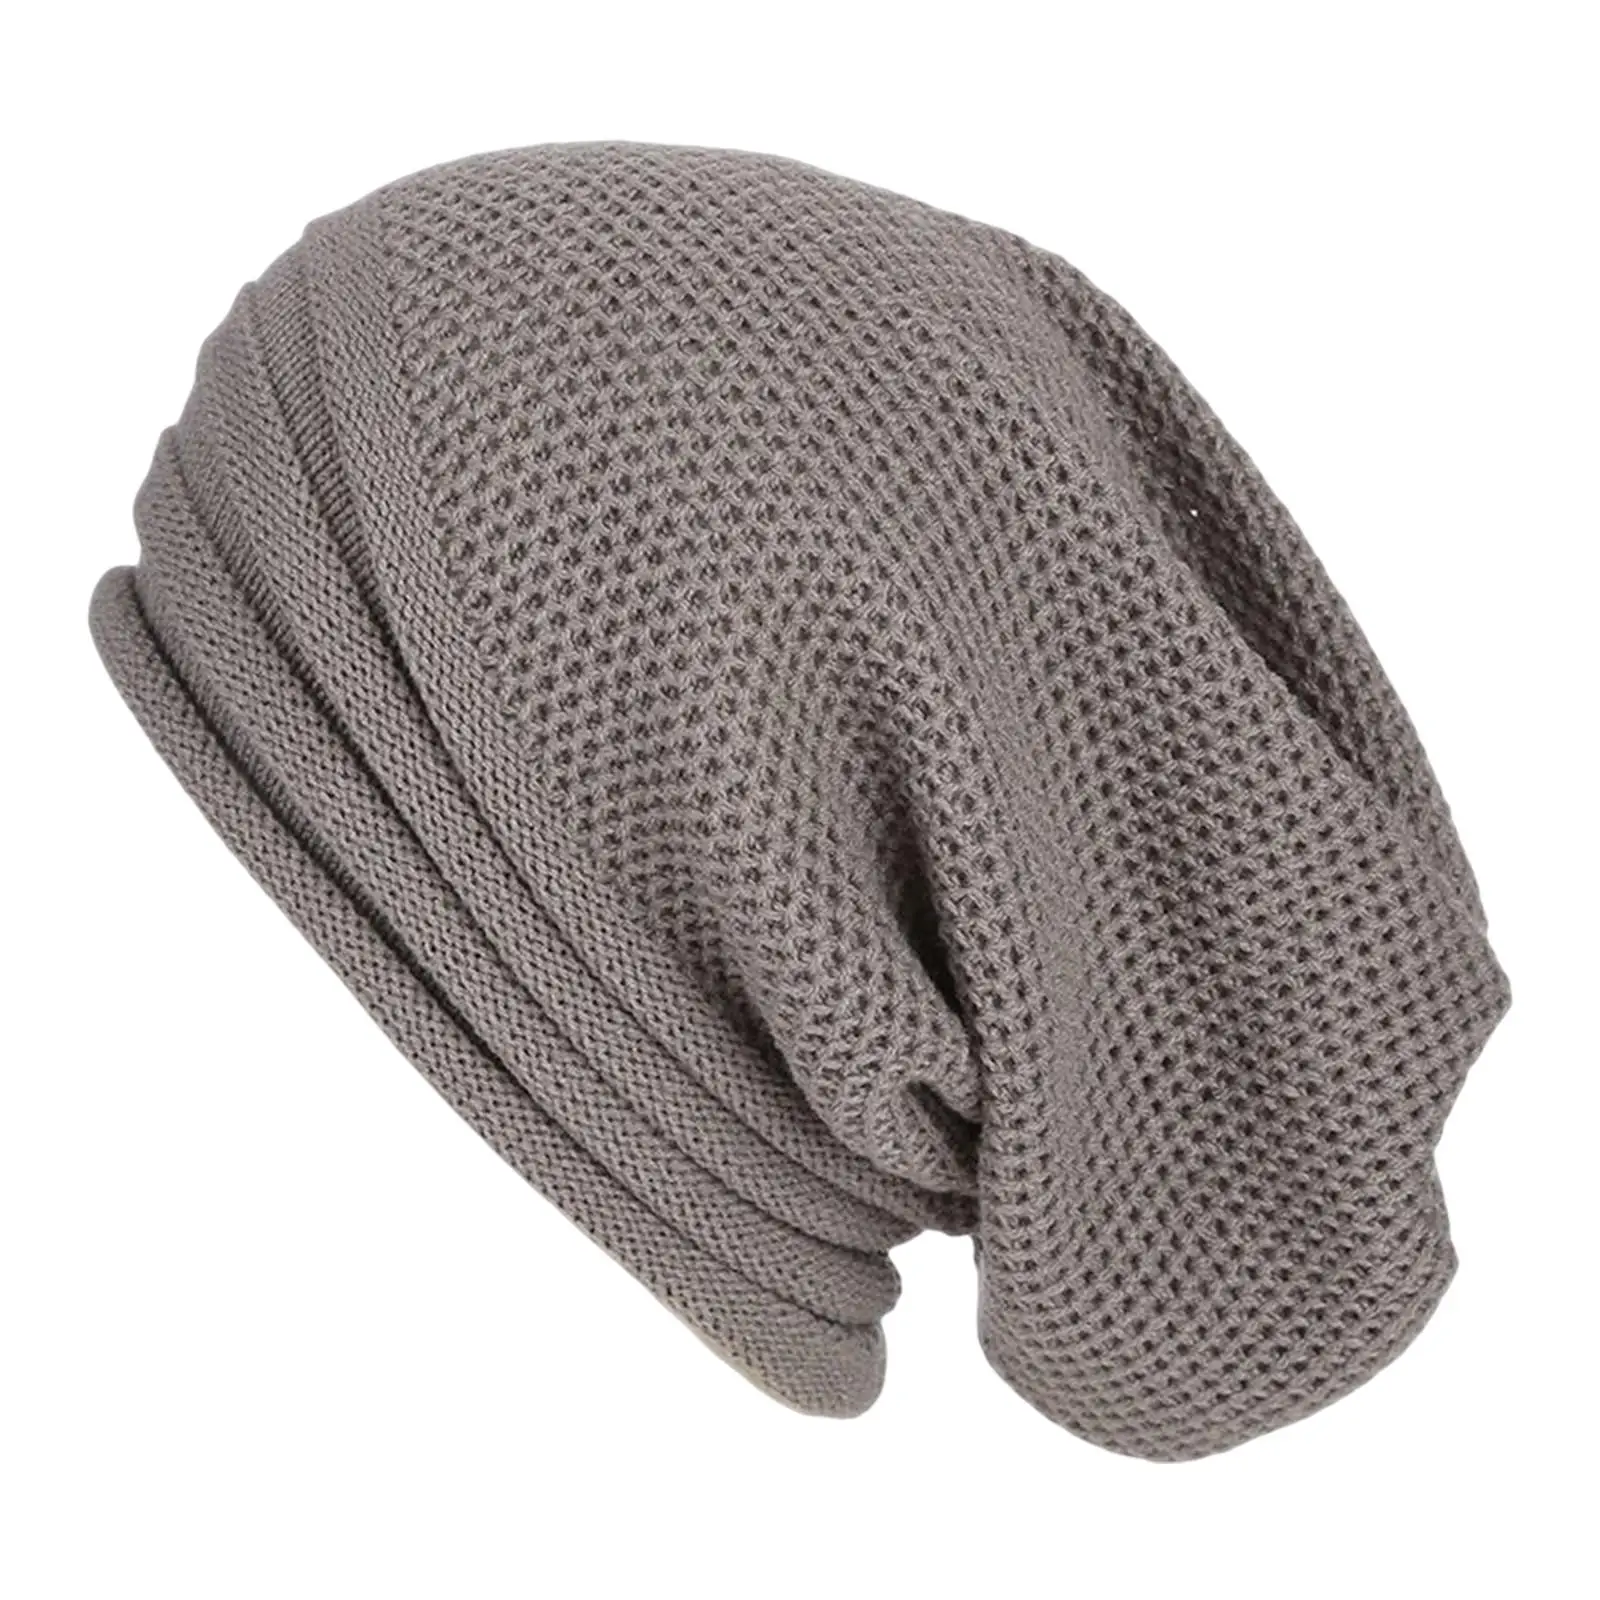 Casual Winter Beanie Hats Slouchy Thick Warm Knit Oversized Lightweight Soft for Running Sport Outdoor Adults Men Women